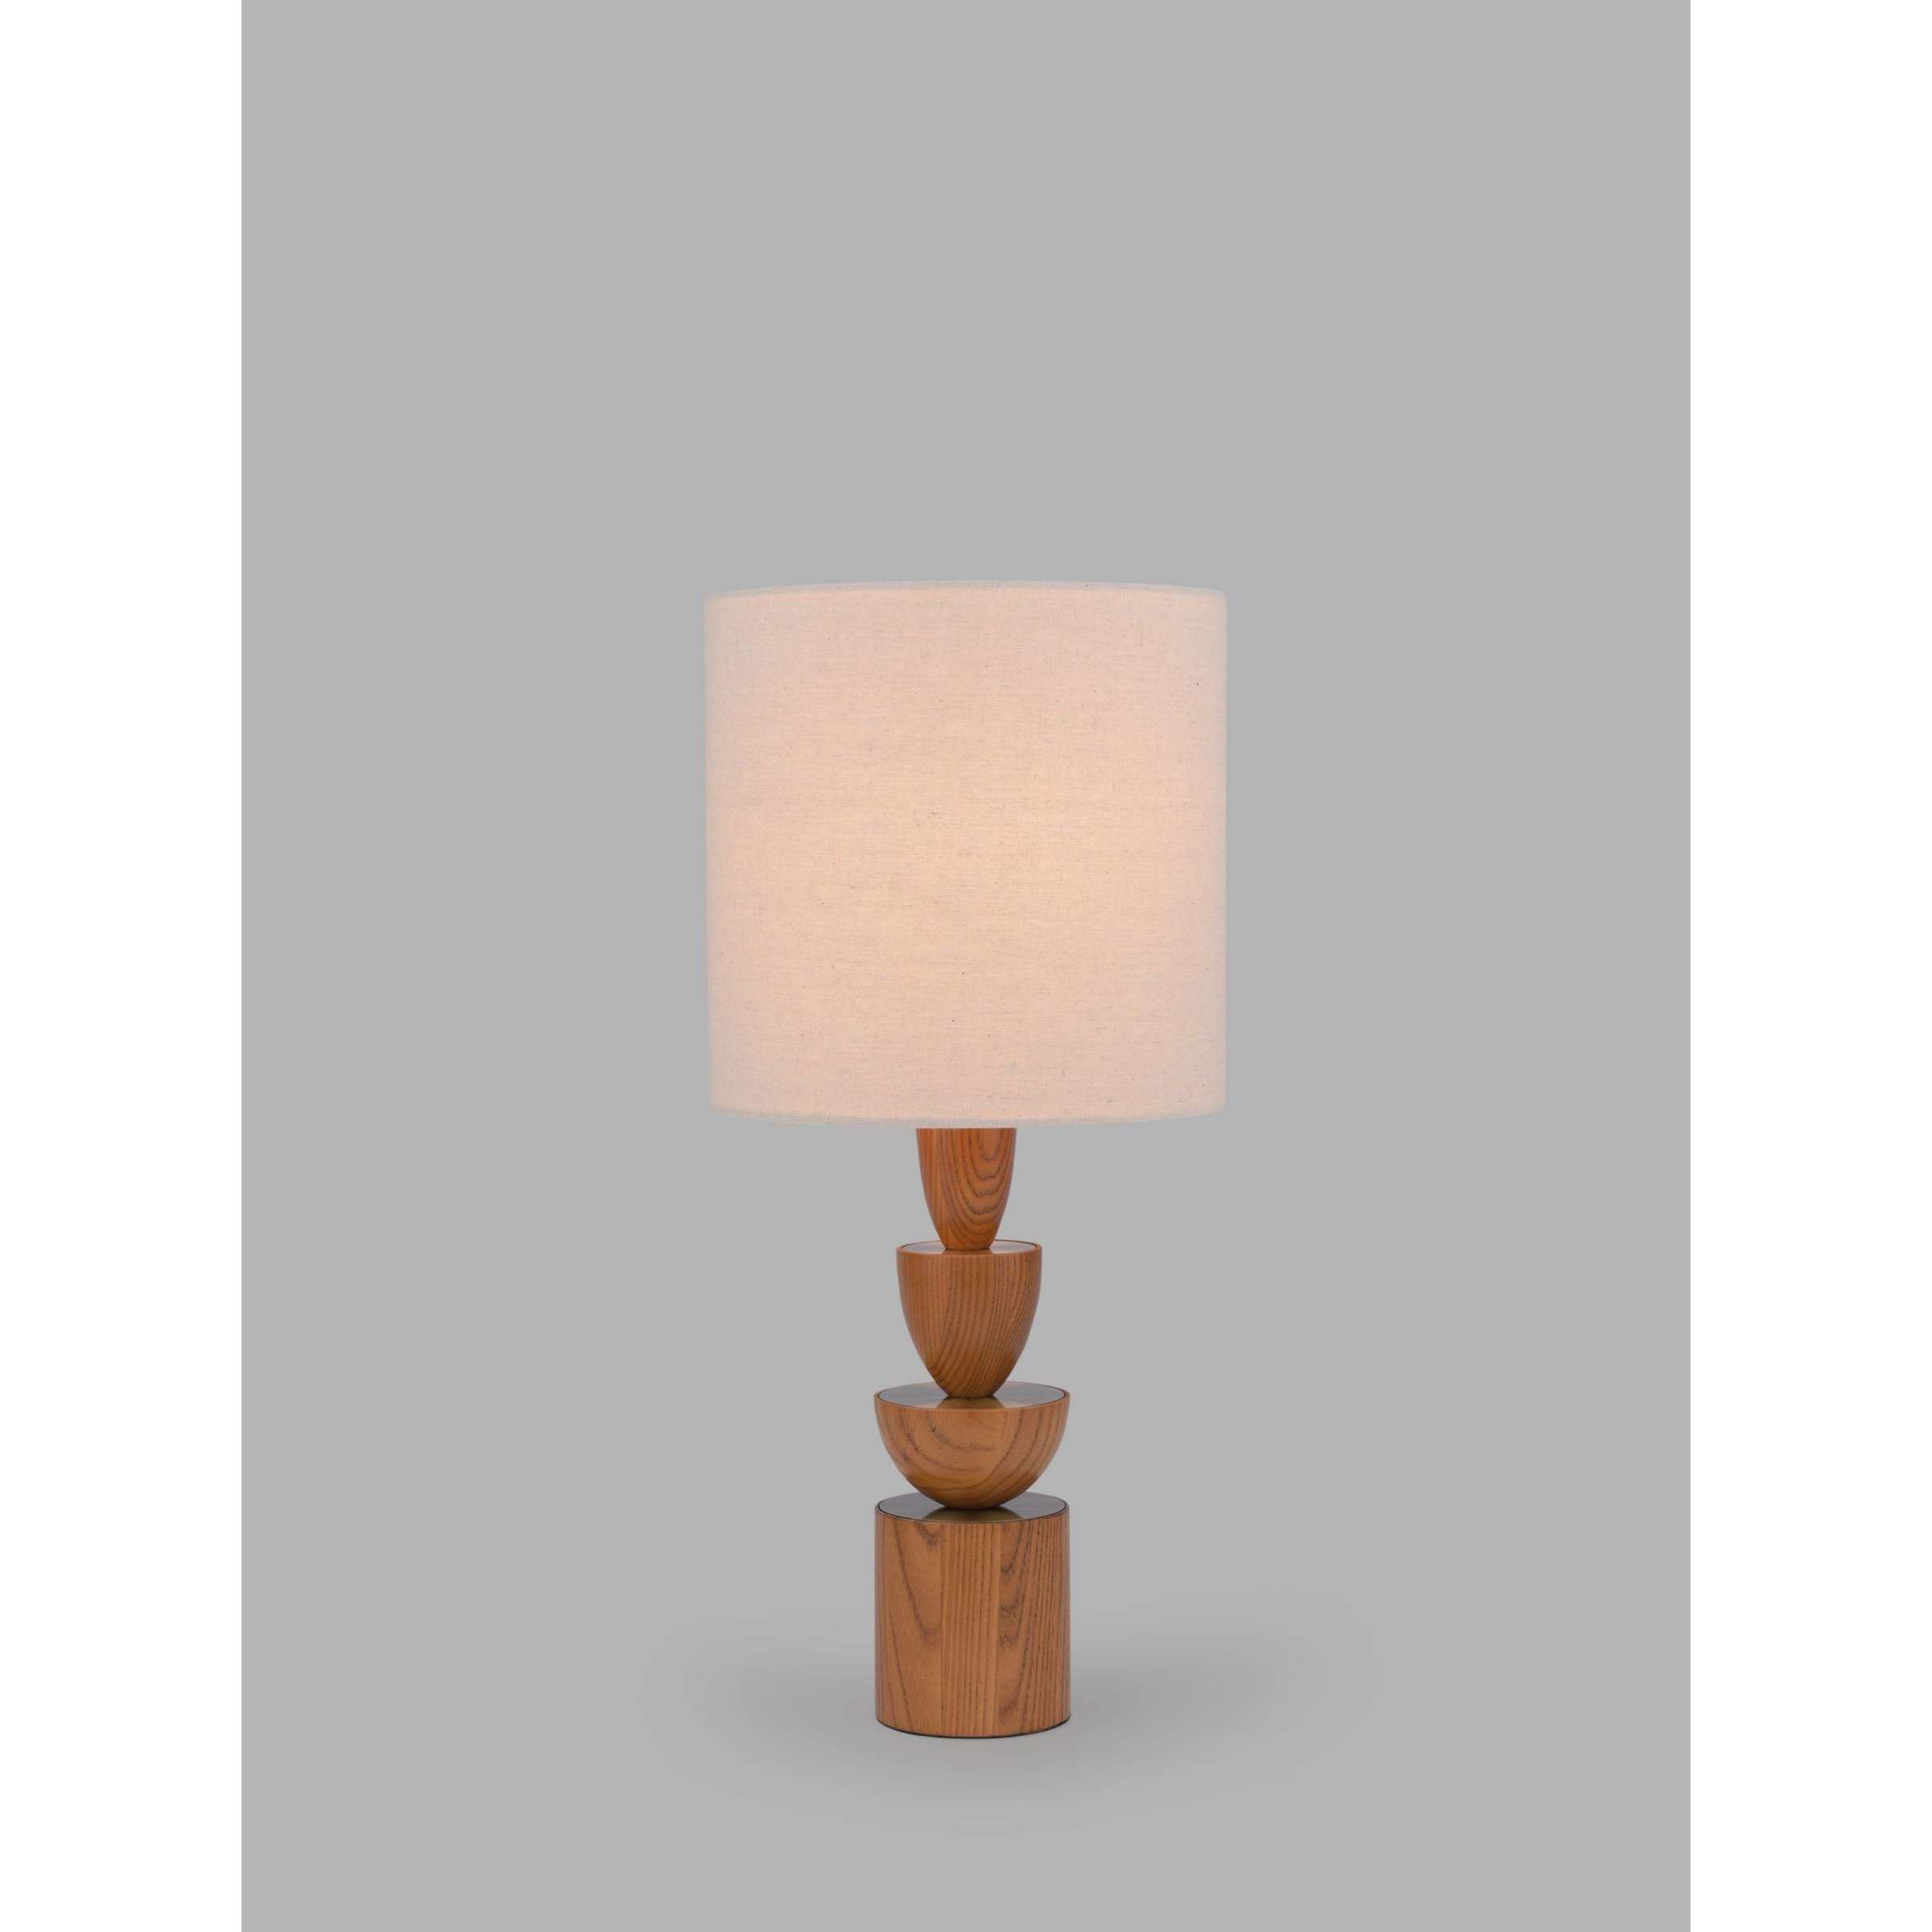 John Lewis Stacked Wooden Table Lamp - image 1